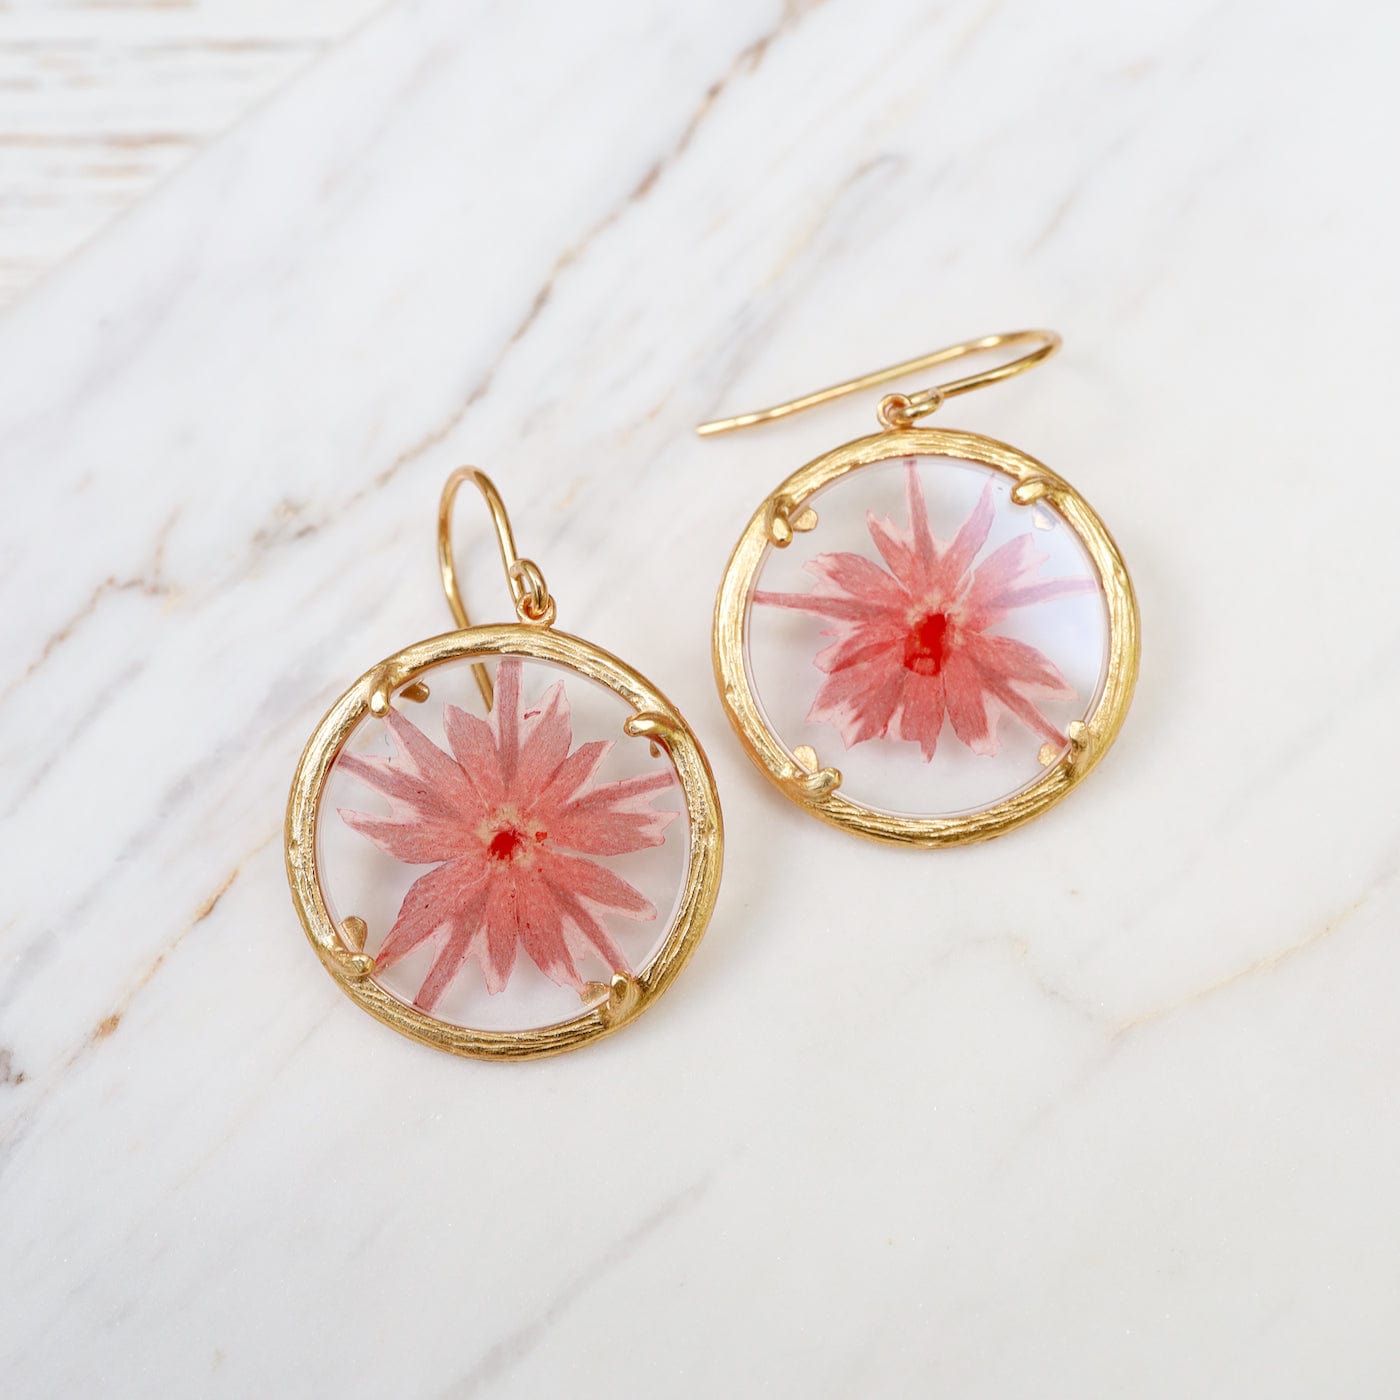 Load image into Gallery viewer, EAR-VRM Phlox Small Glass Botanical Earrings - 18K Gold Vermeil
